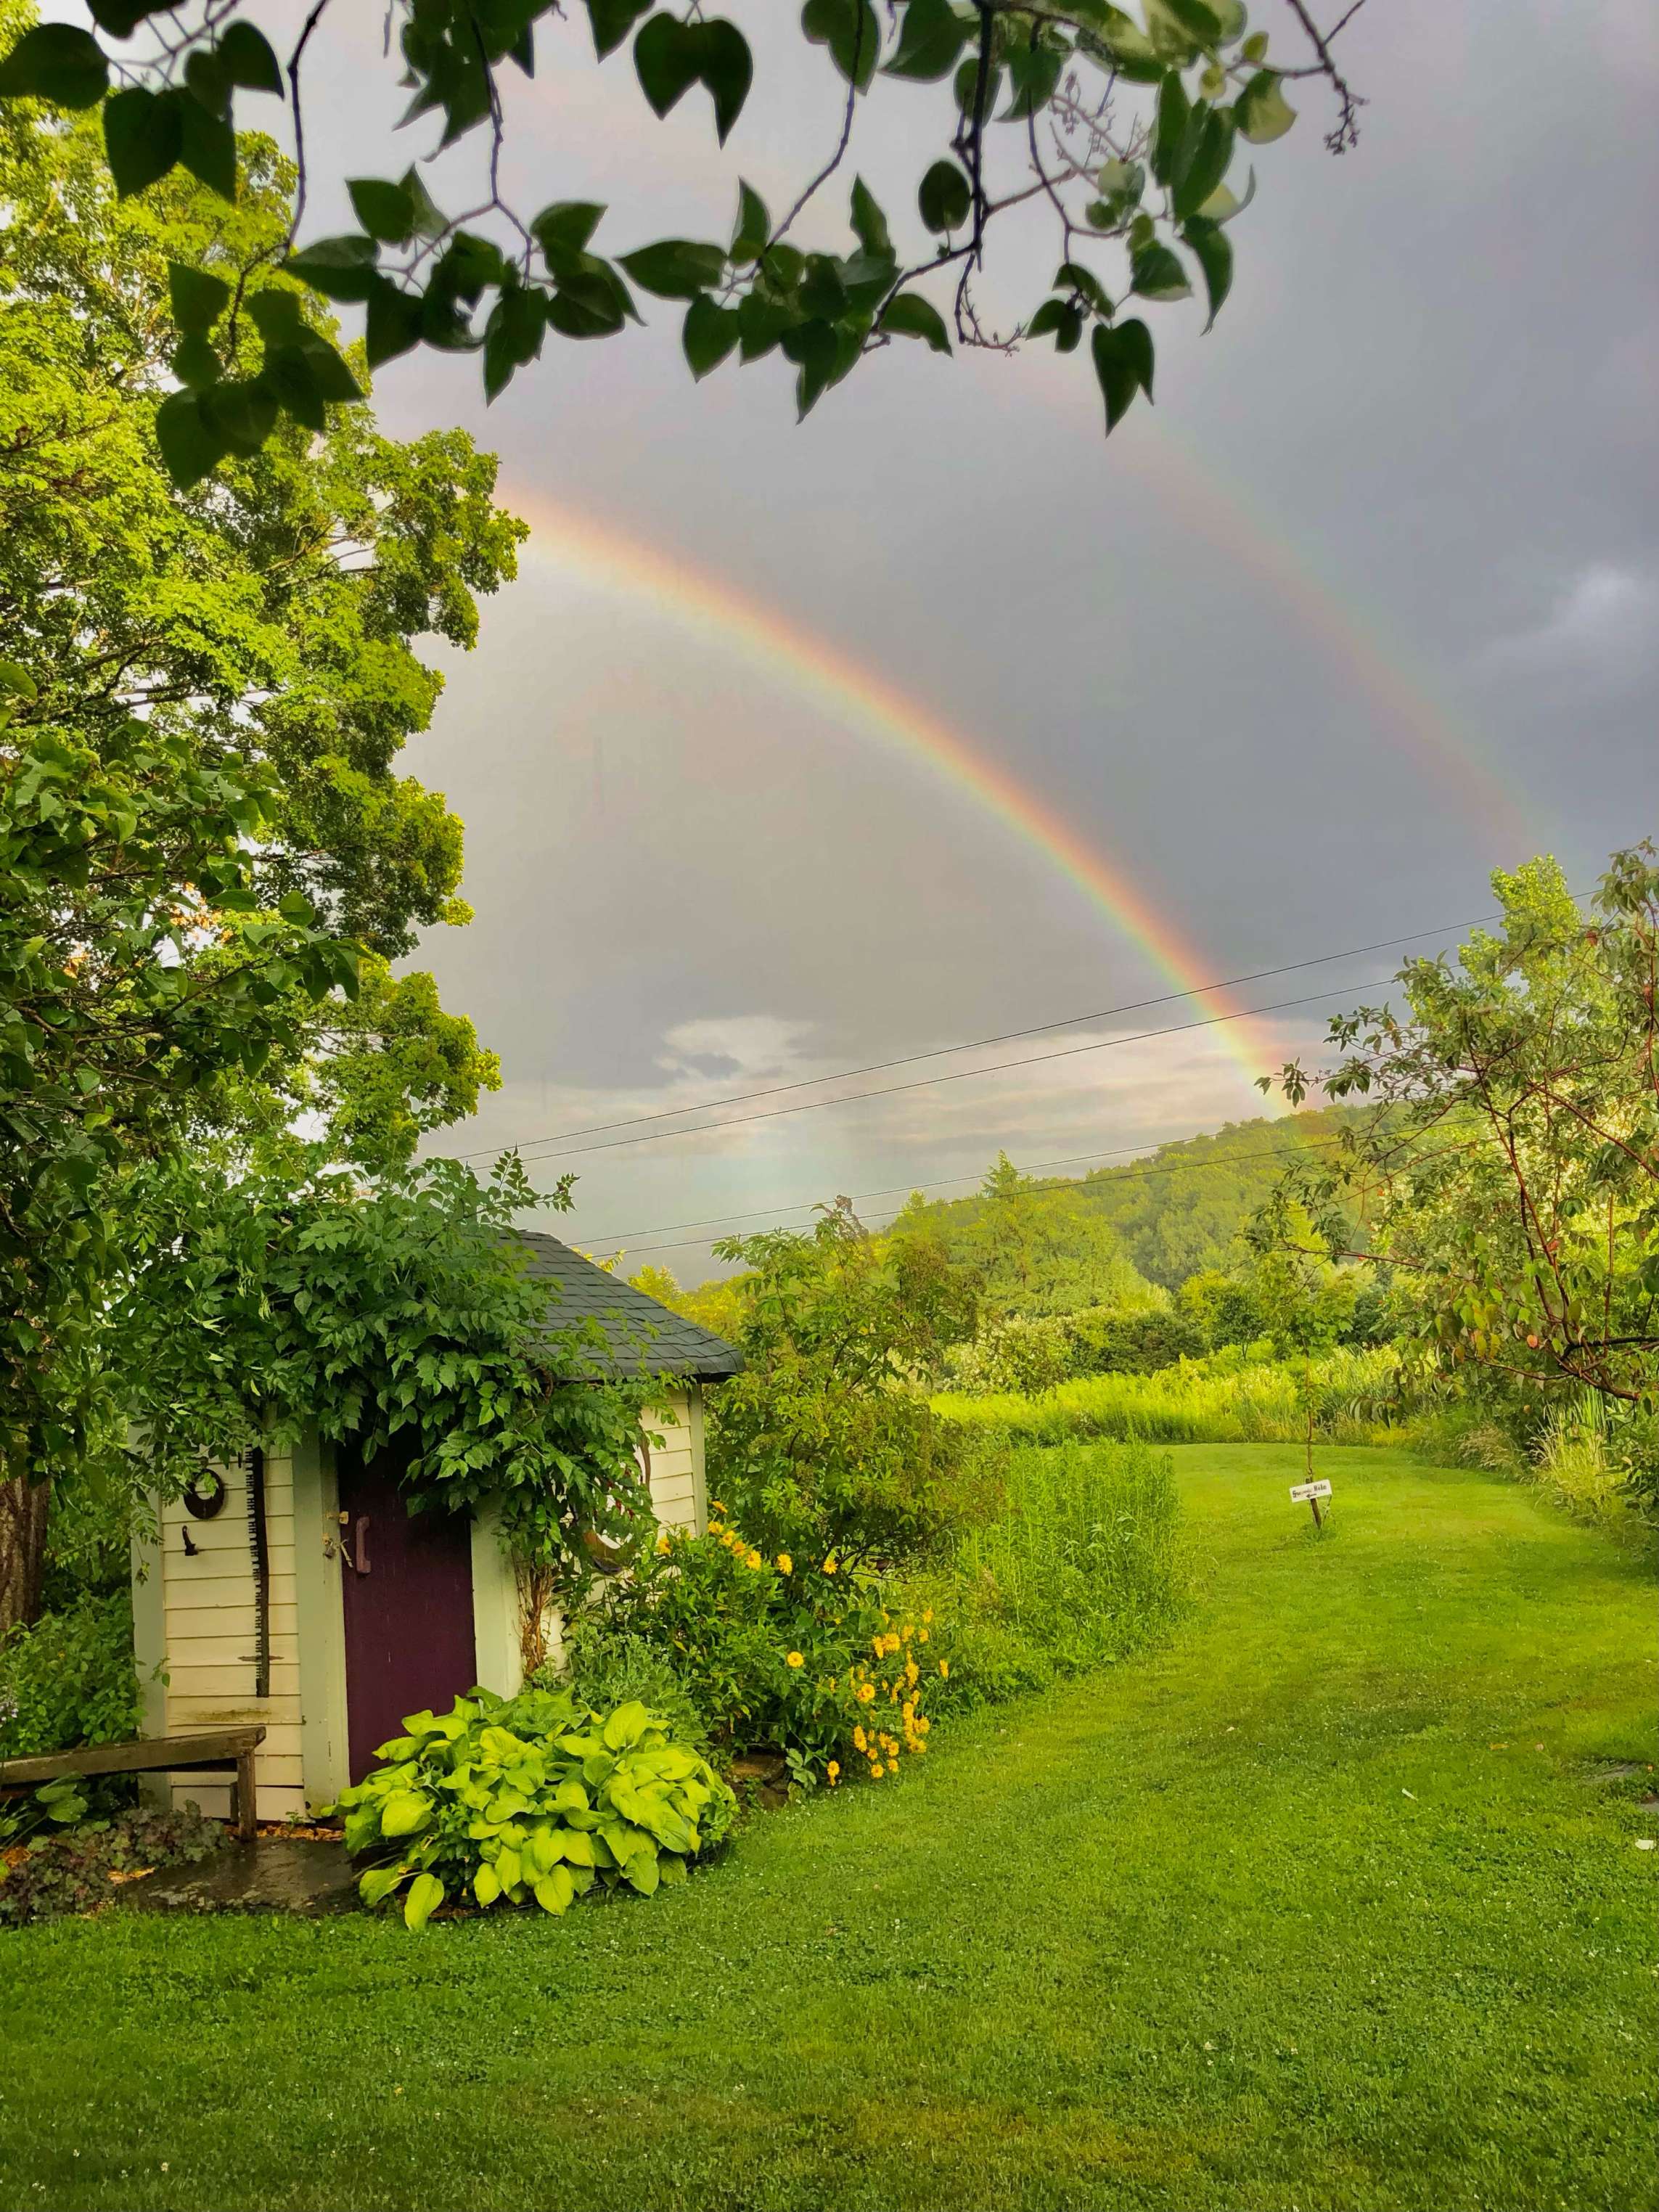 double rainbow behind a small shed